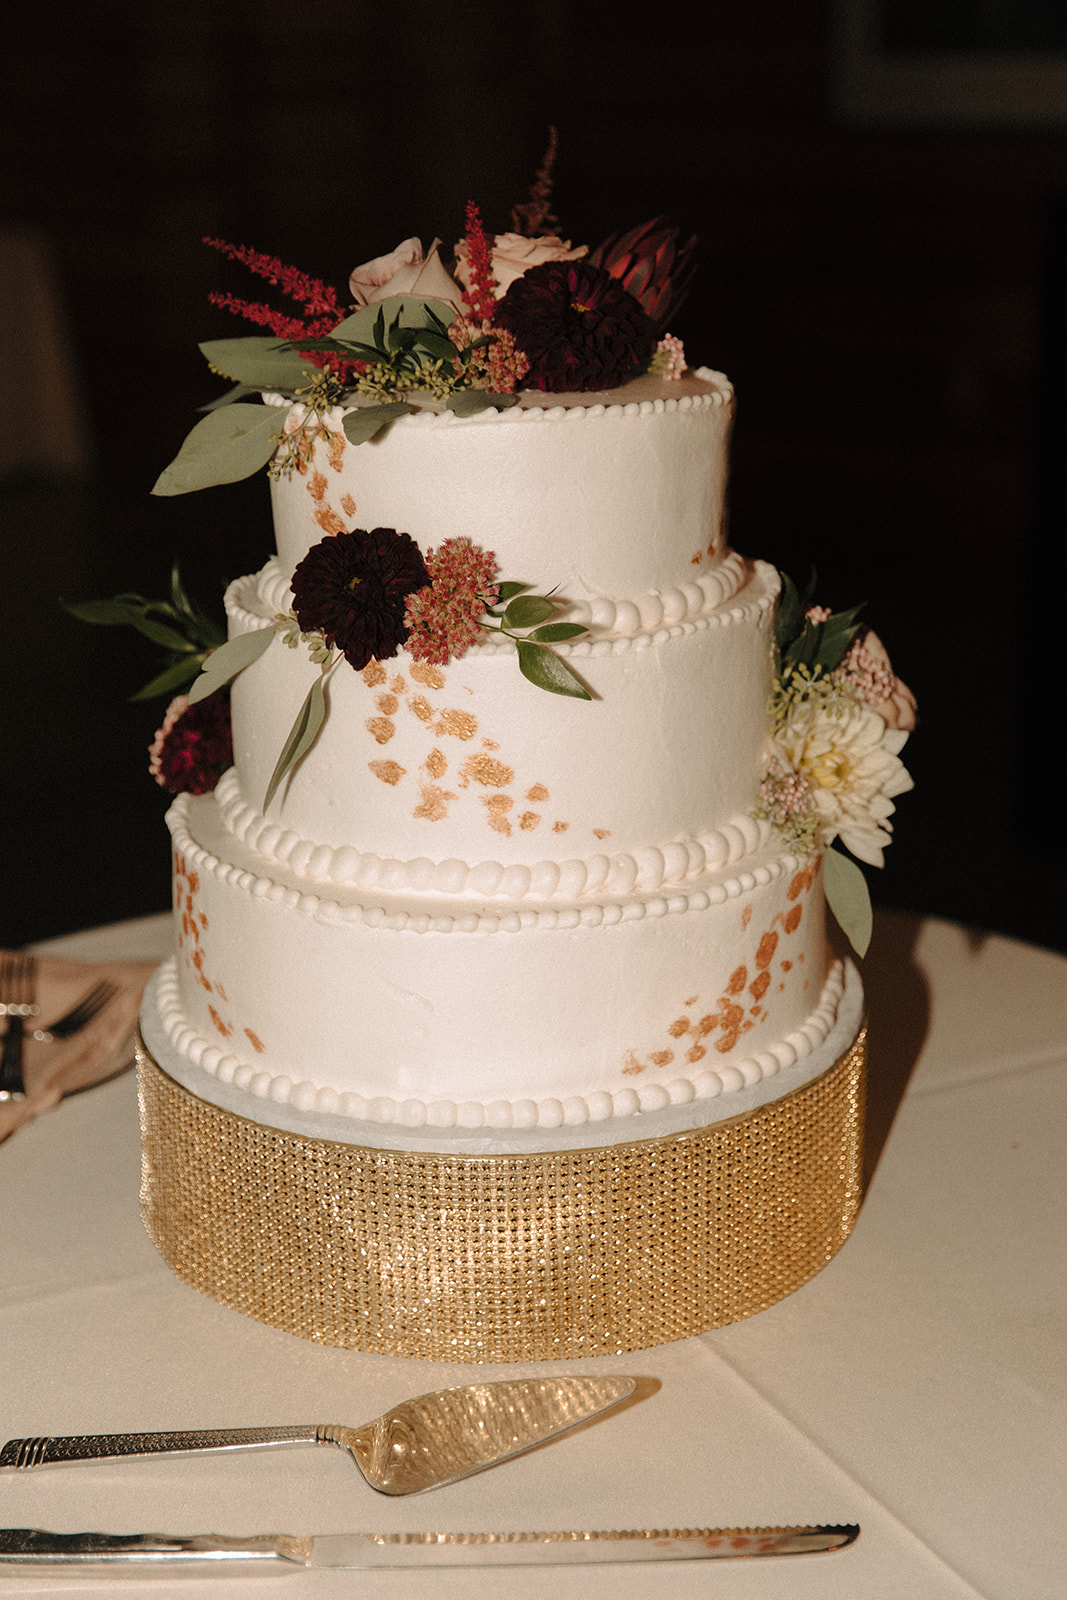 Sparkly wedding cake stand with pink flowers